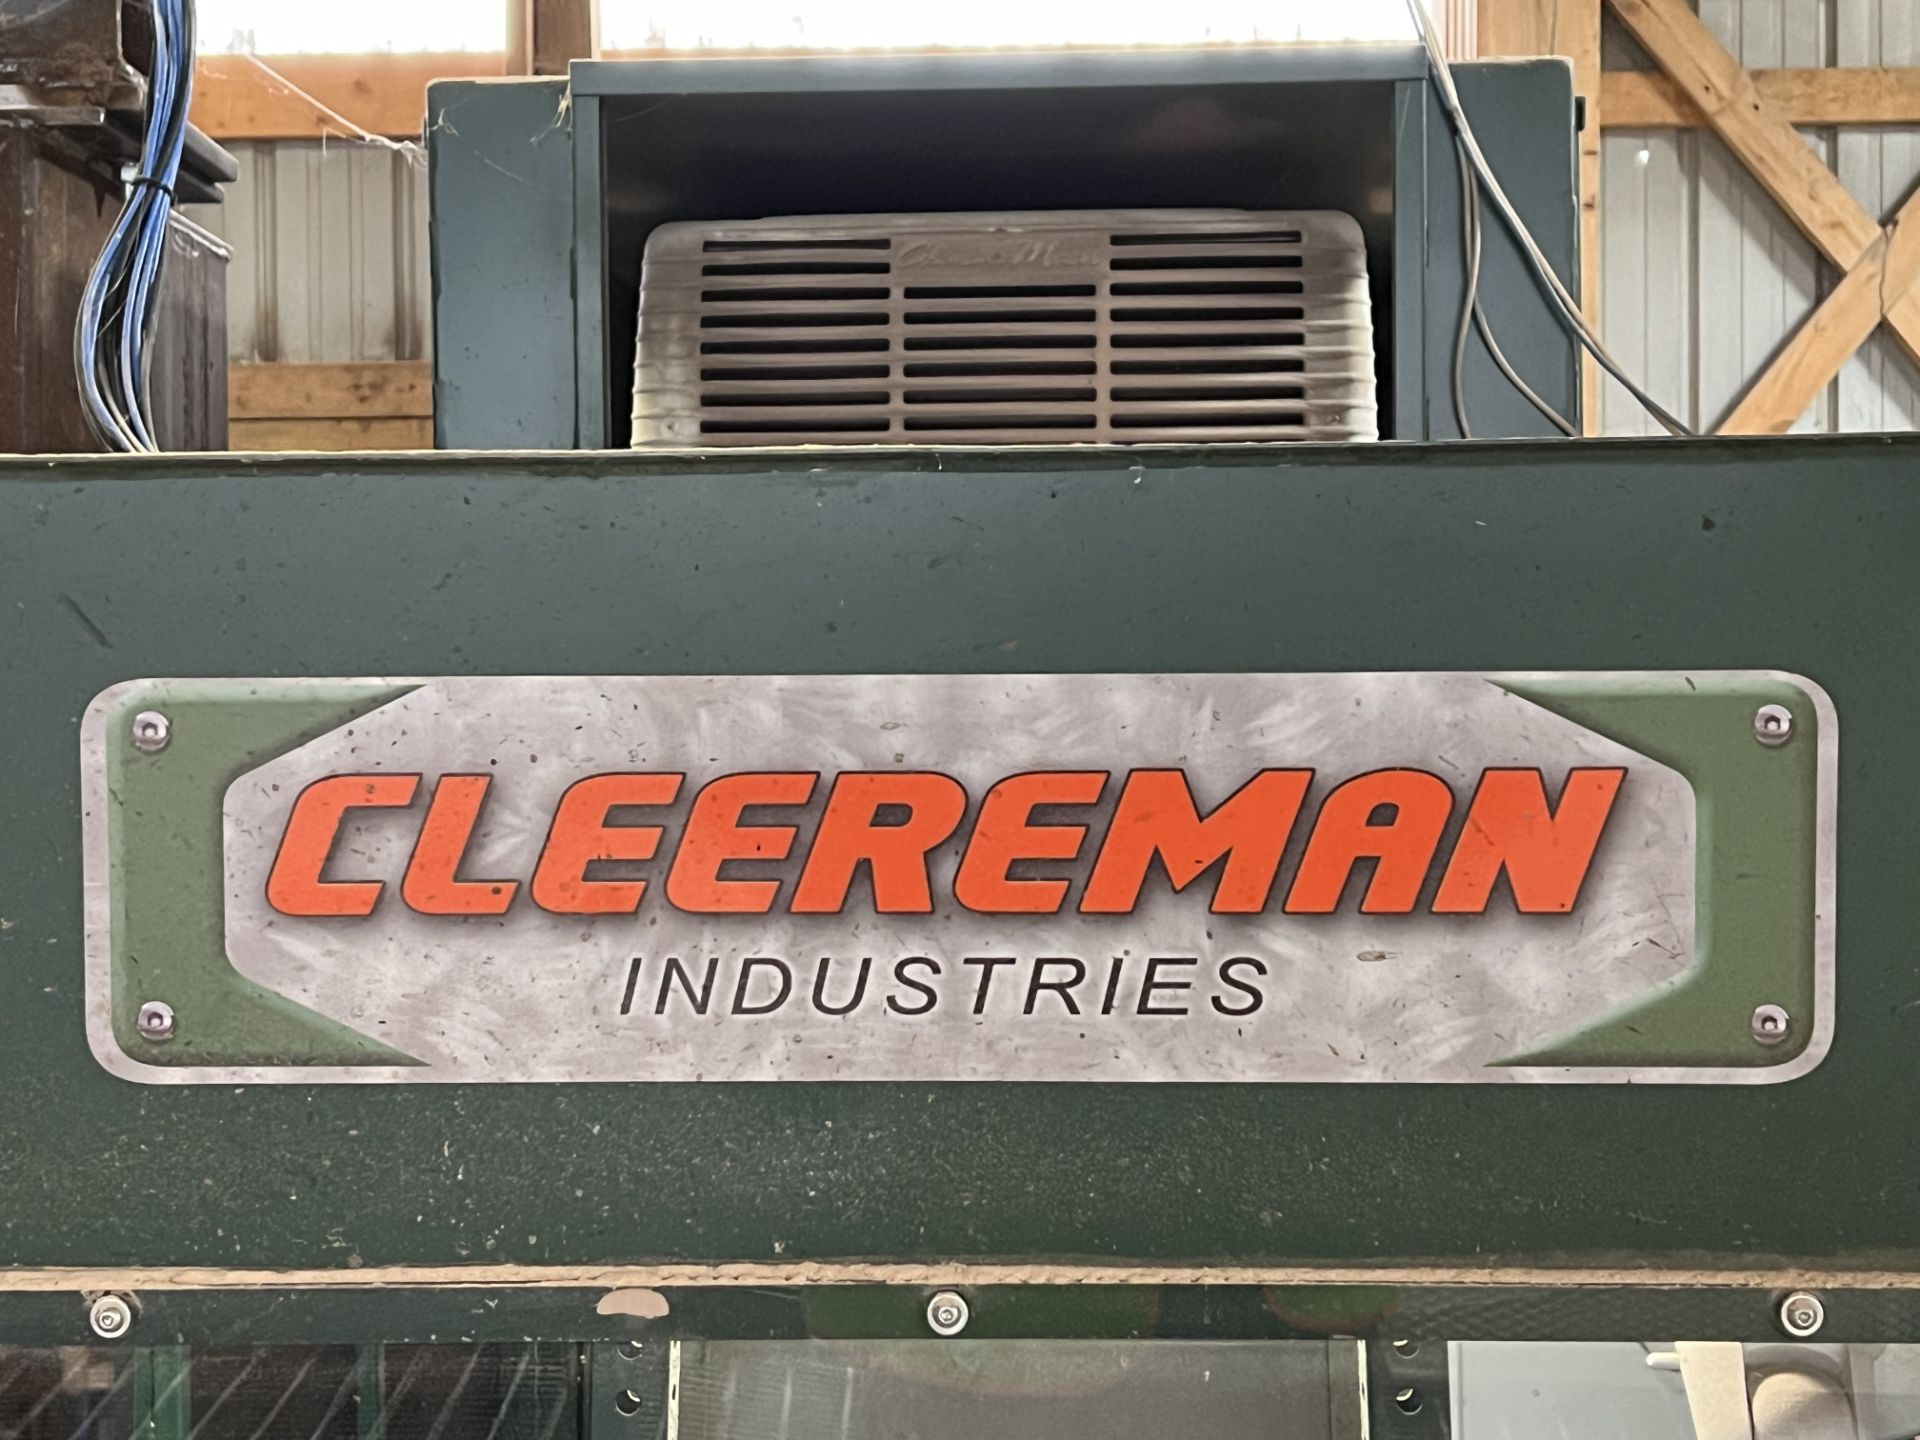 2015 Clearman/PHL 48" Vertical Band Saw Mill - Image 3 of 16